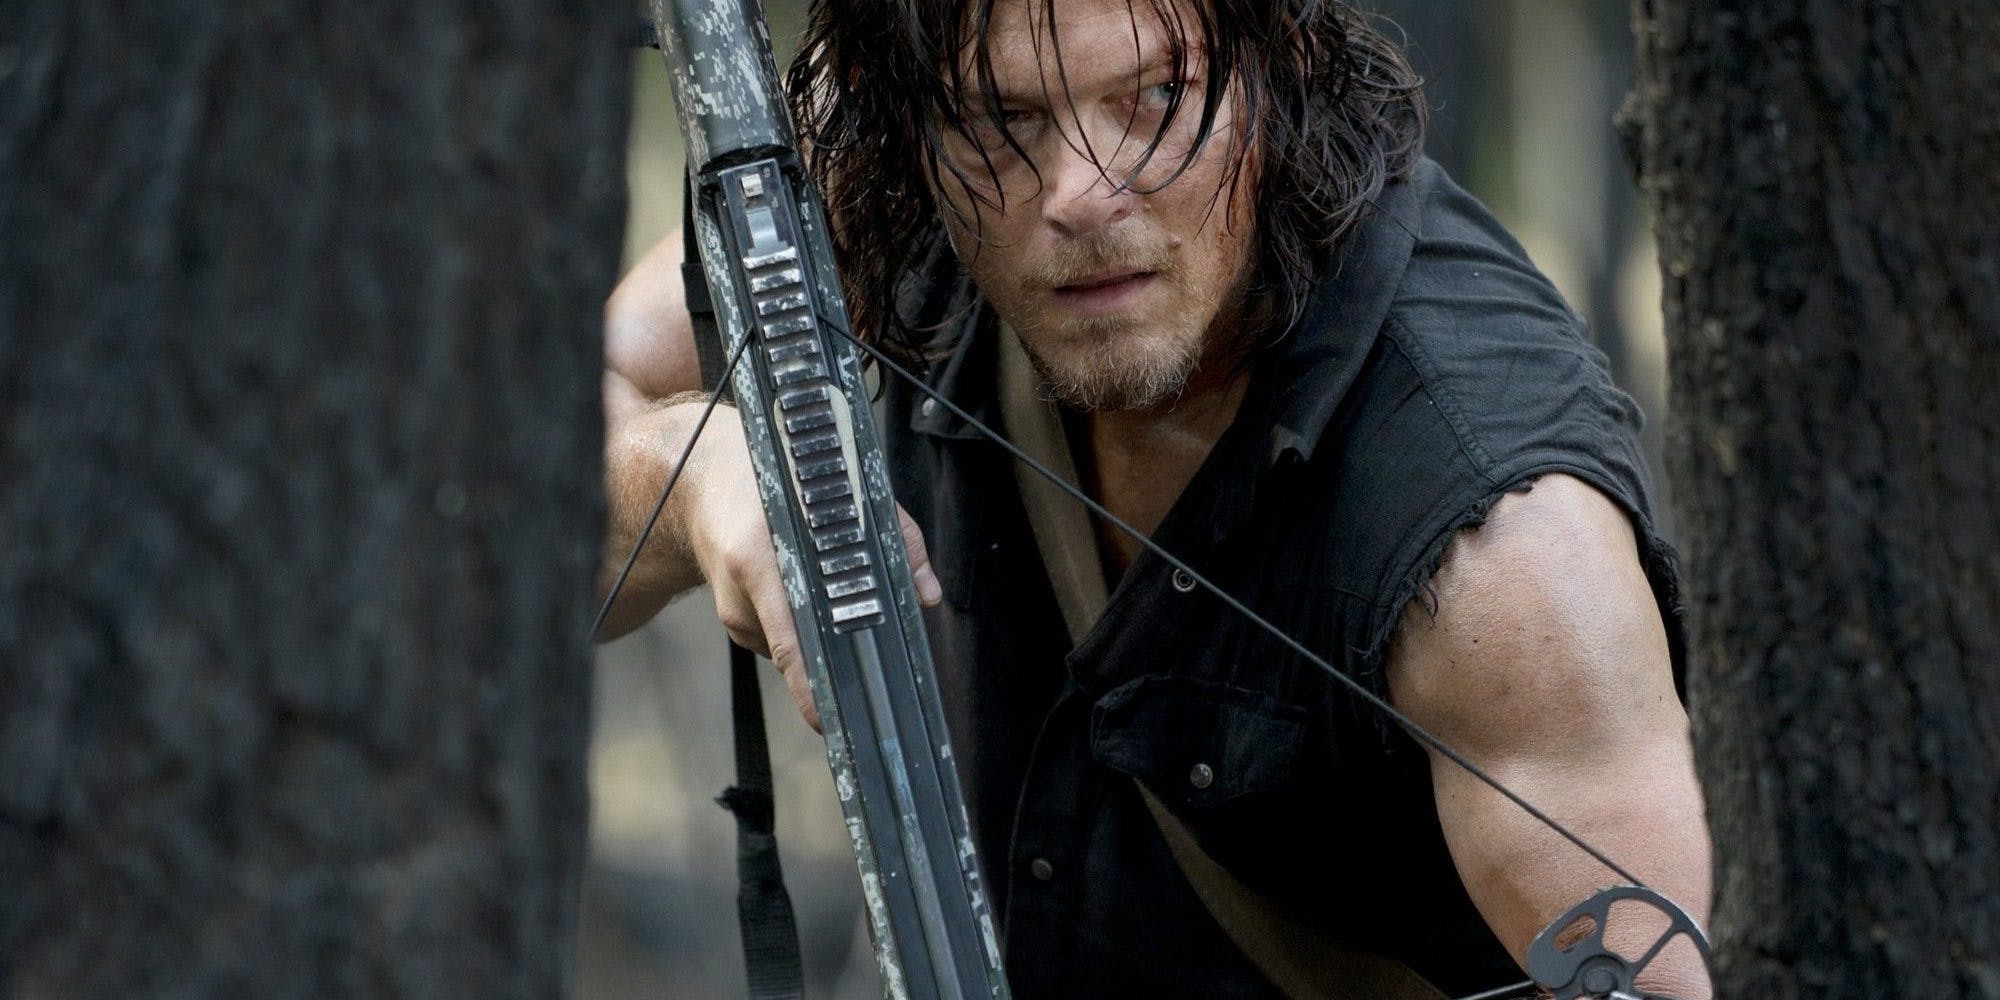 The Walking Dead 15 Most Capable Main Characters Ranked According To Fighting Ability